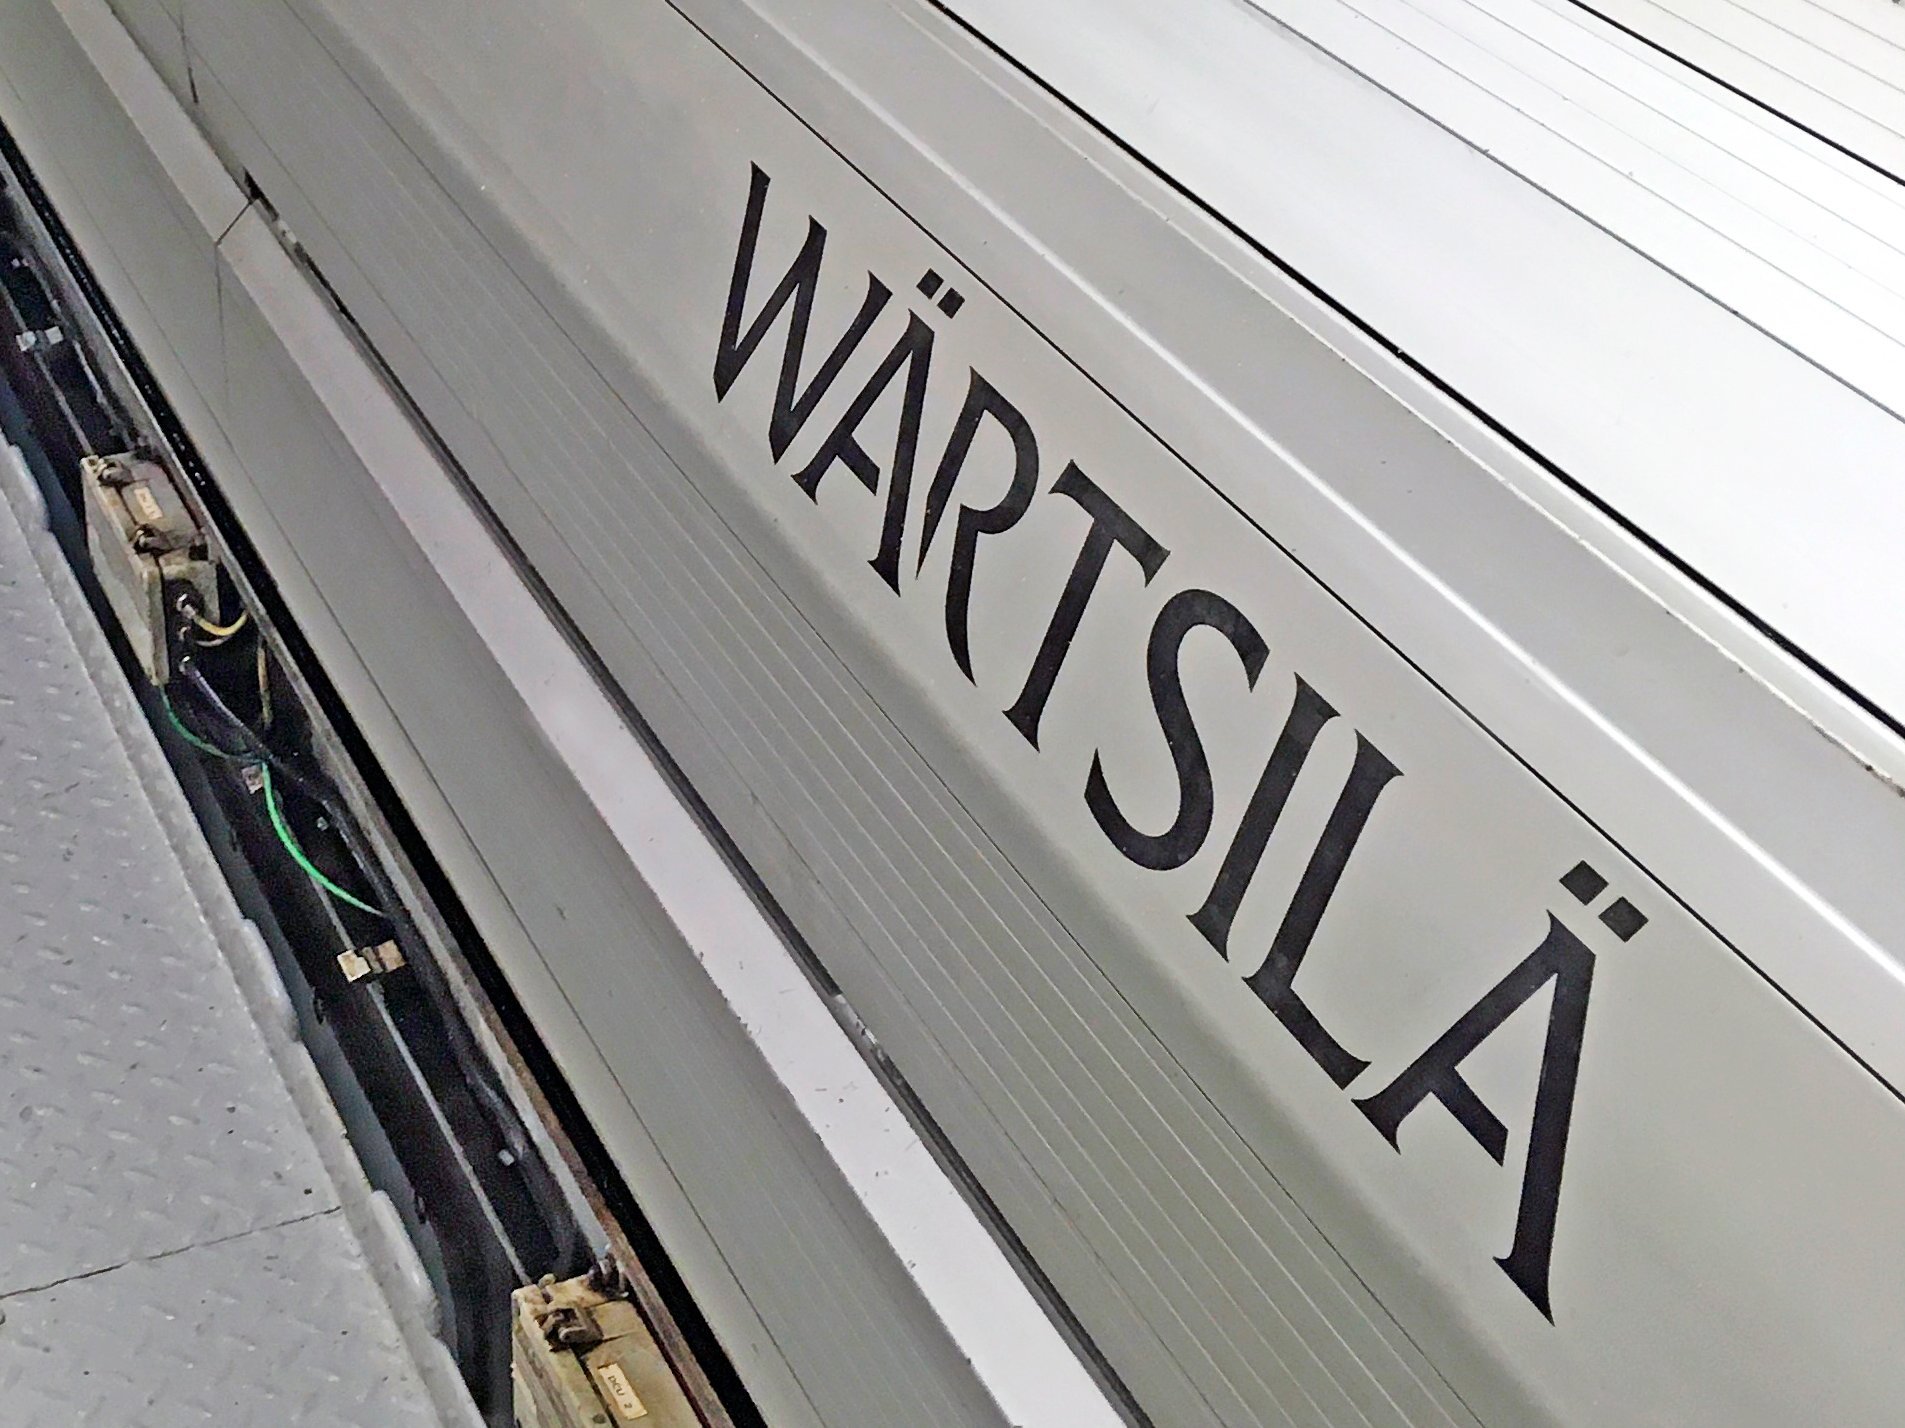 The image shows an engine room of a ship with a silver coloured WECS 23000 engine control system of Wärtsilä